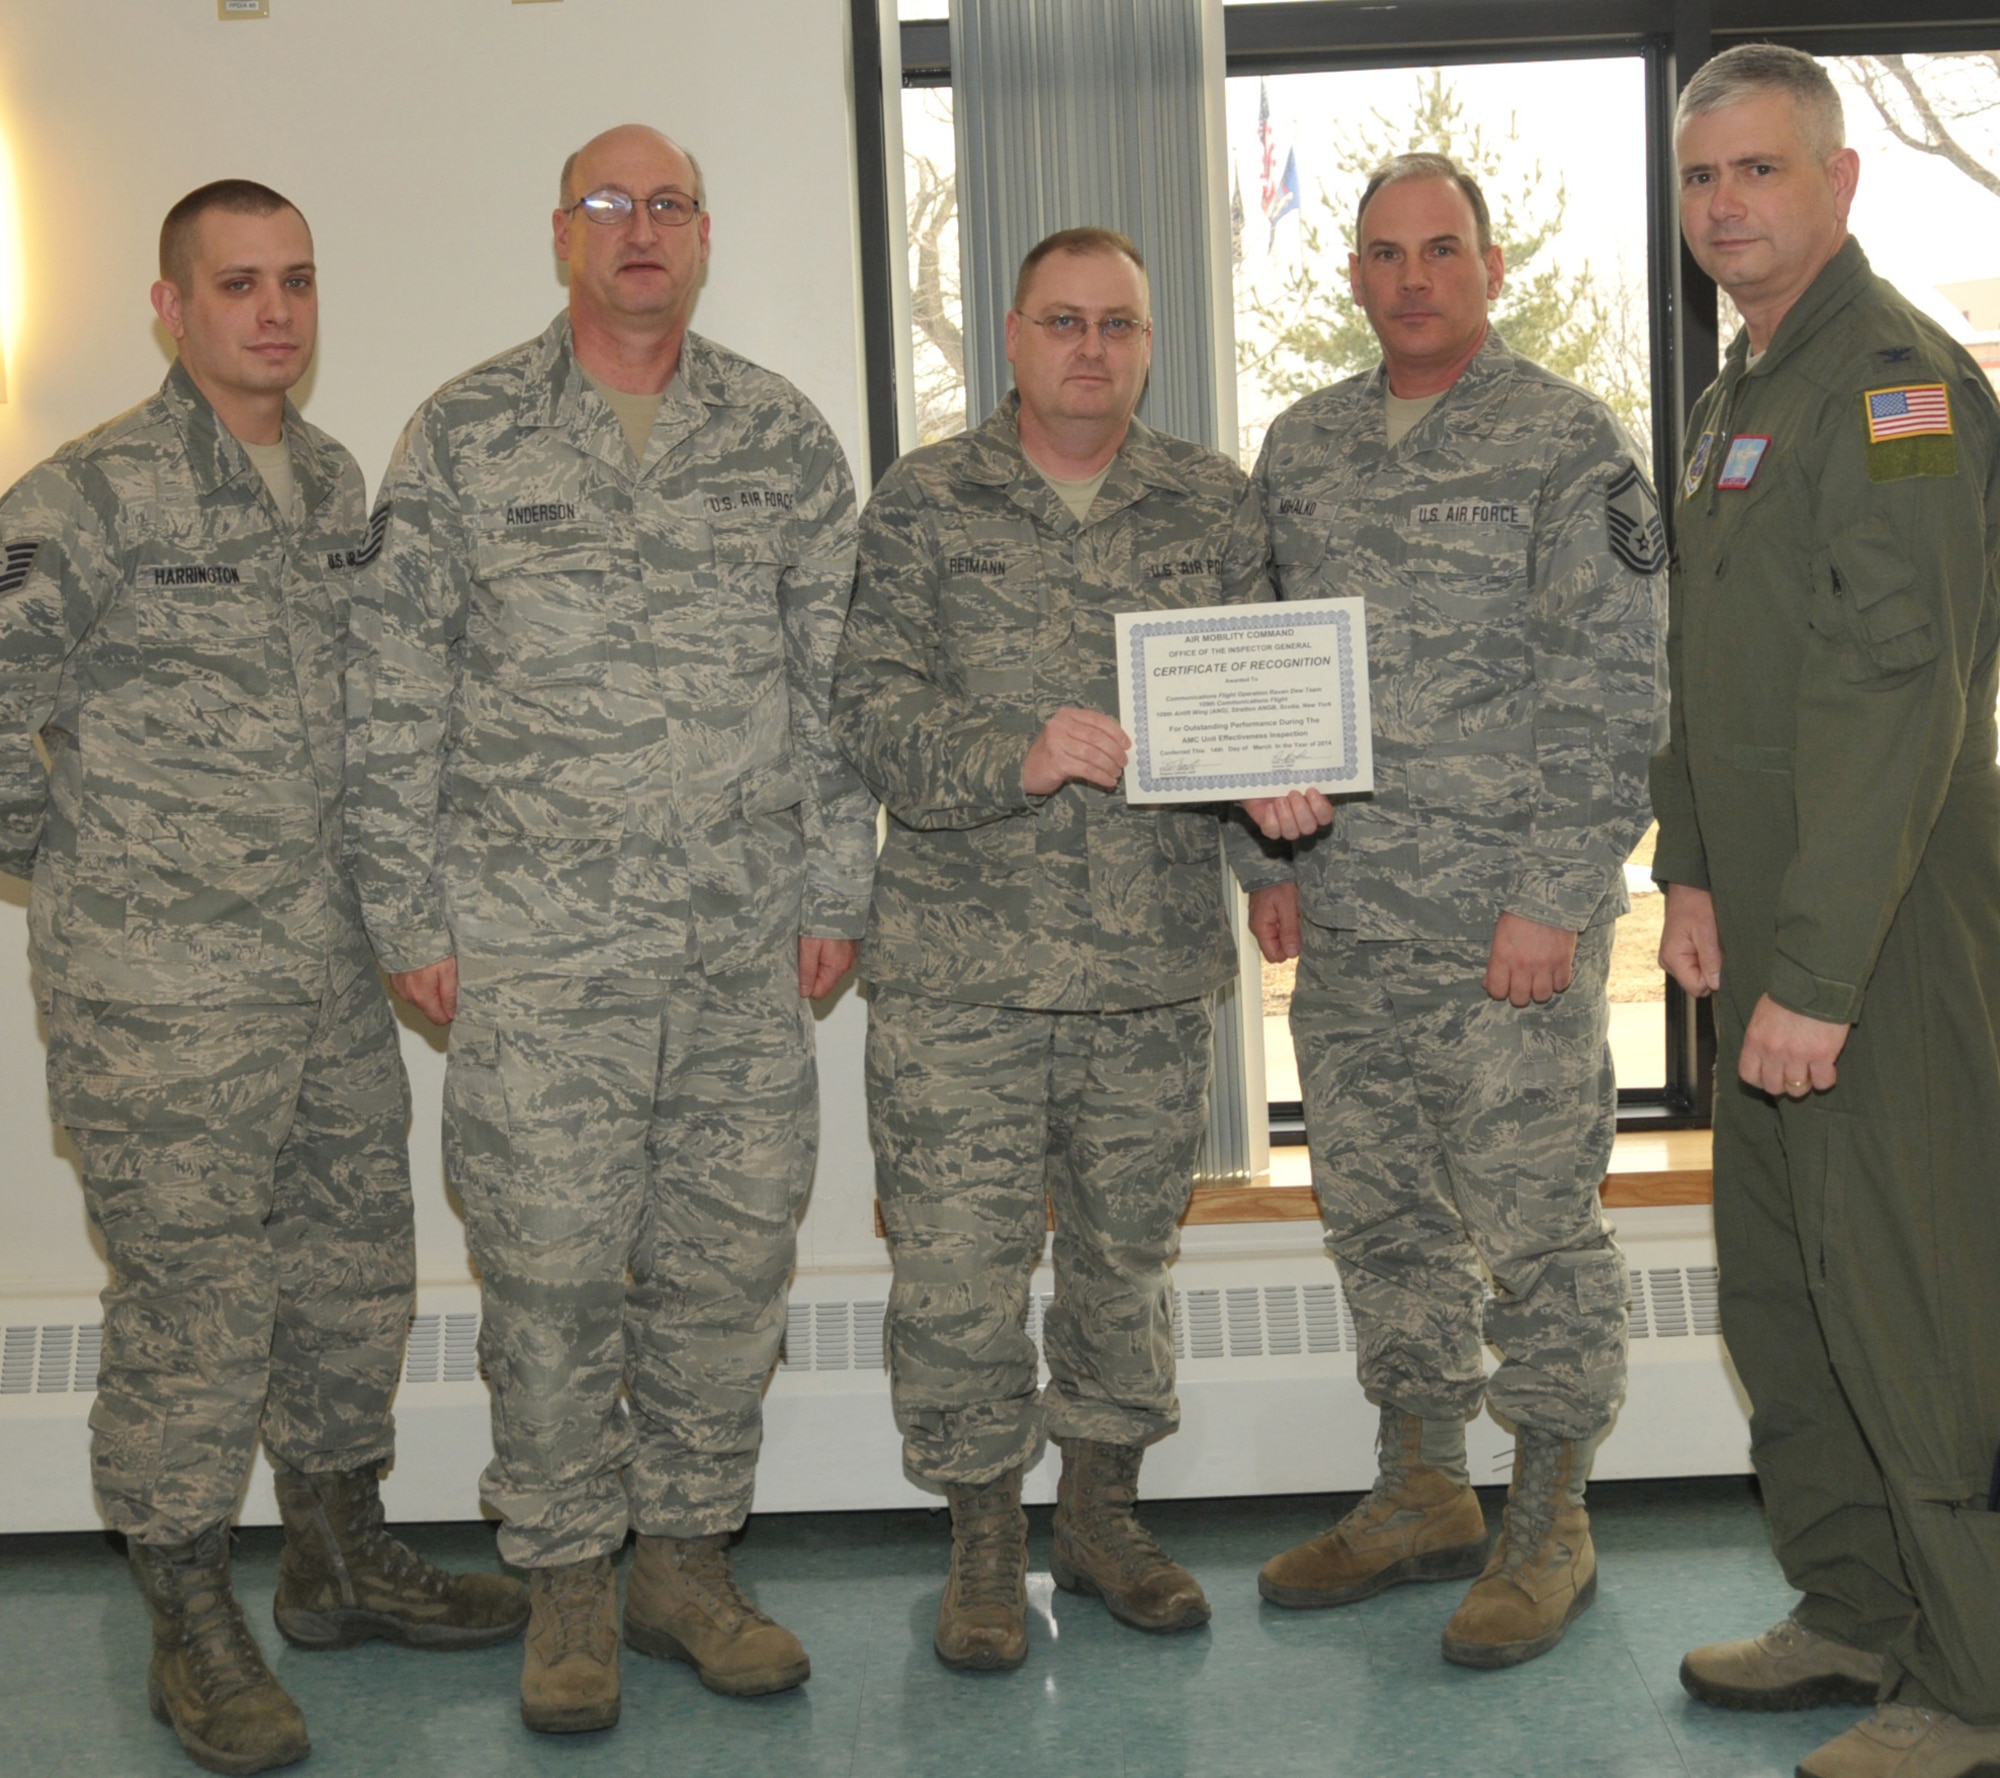 STRATTON AIR NATIONAL GUARD BASE, N.Y. -- Col. Shawn Clouthier (right), 109th Airlift Wing commander, presents (from left) Tech. Sgt. Robert Harrington, Tech. Sgt. Scott Anderson, Master Sgt. Patrick Reimann and Senior Master Sgt. Greg Mihalko with a certificate of recognition March 25, 2014, from Air Mobility Command for outstanding performance during the 109th AW's recent Unit Effectiveness Inspection. The Airmen, of the 109th Communications Flight, received team recognition as part of the Communications Flight Operation Raven Dew Team. Other members of the team not pictured were retired Senior Master Sgt. Jeffrey Lapp, Staff Sgt. Johnny Cope and Senior Airman Daniel Street. (Air National Guard photo by Master Sgt. William Gizara/Released)